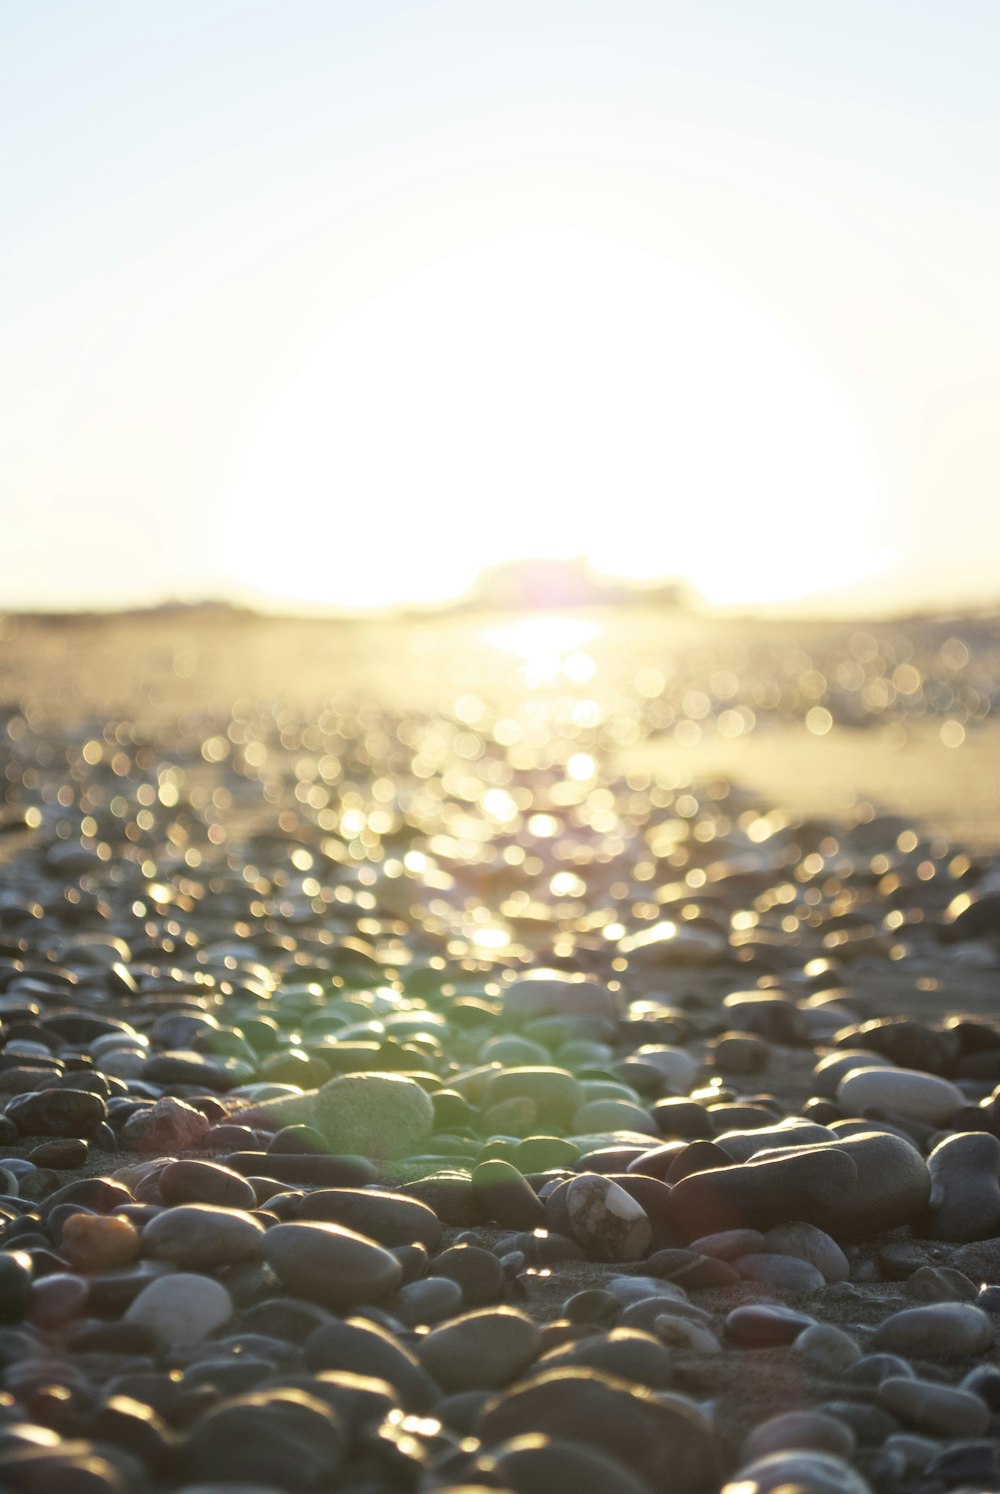 a close up of rocks on a beach with the sun in the background